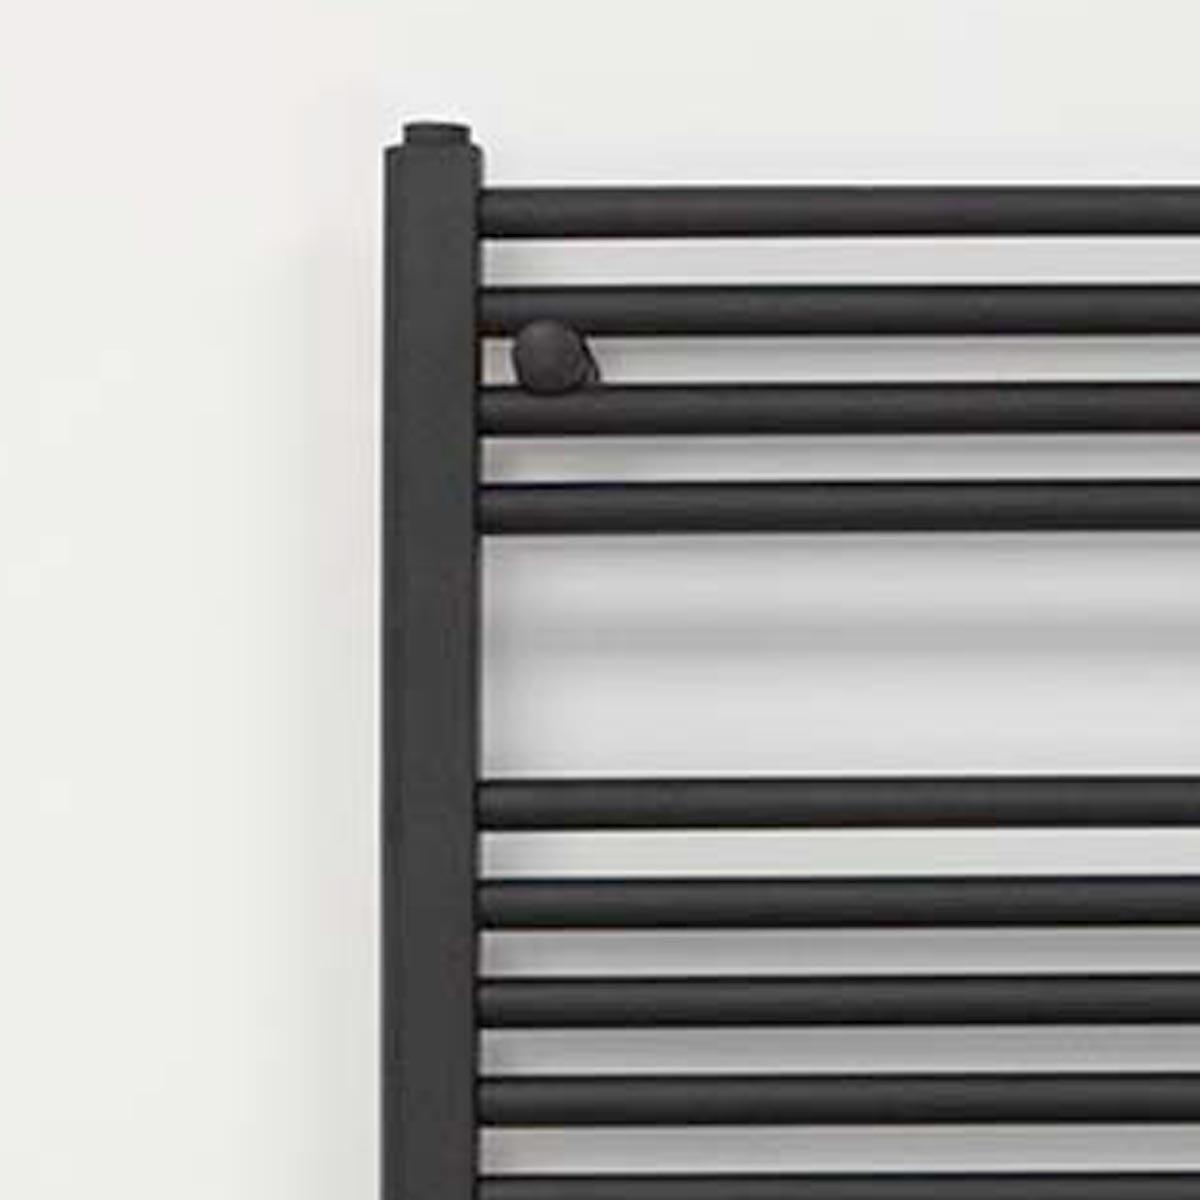 Anthracite & Grey Electric Towel Rails